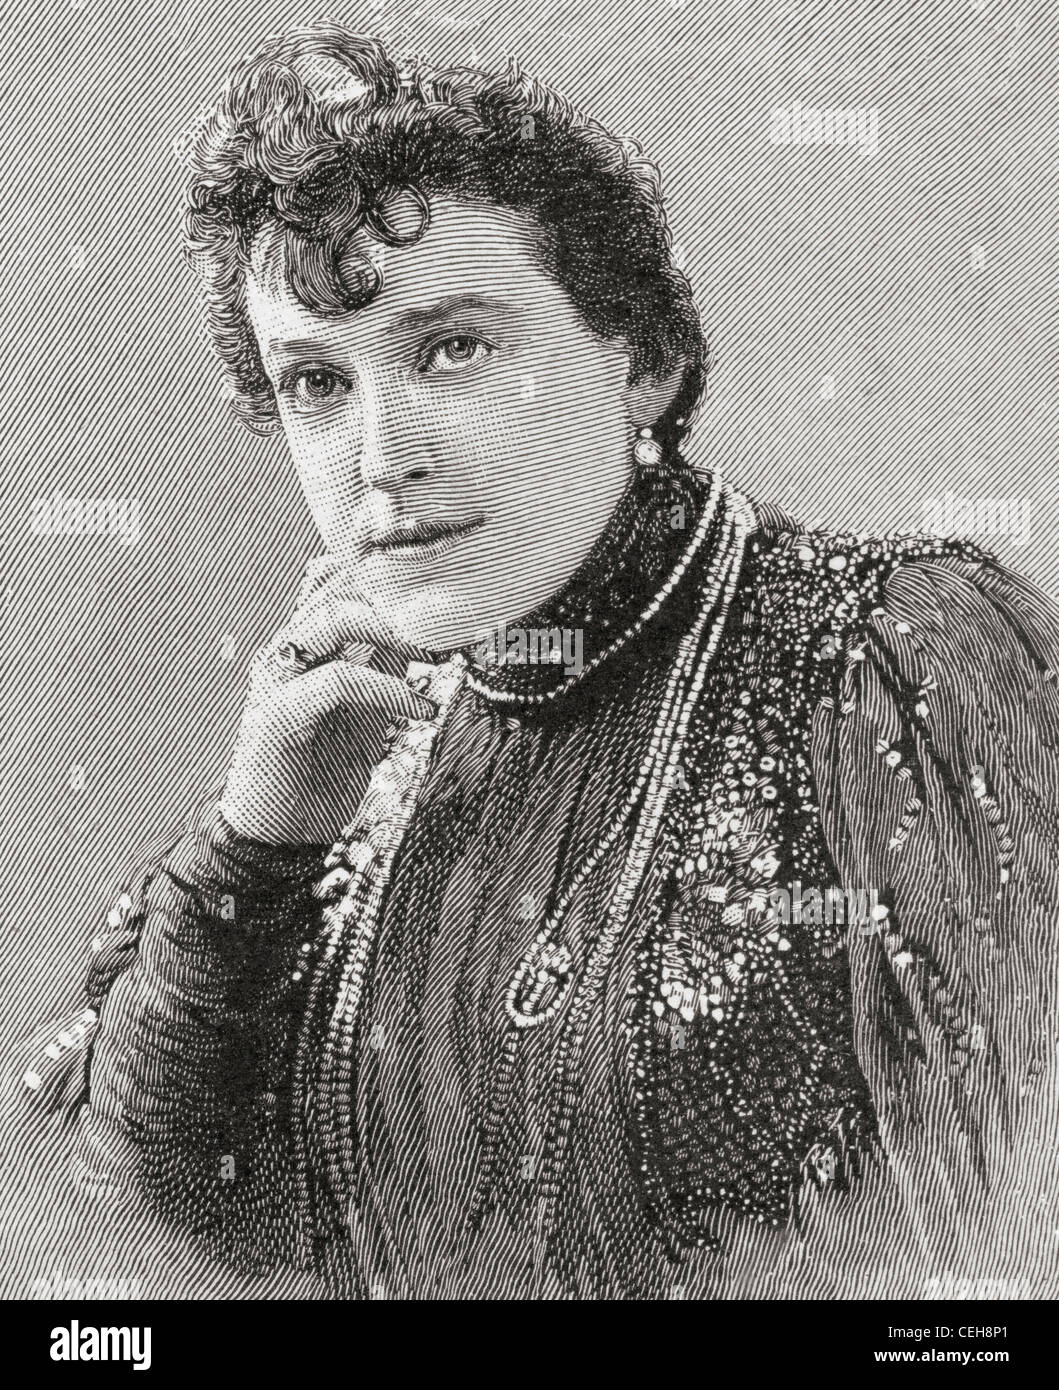 Alma Stuart Stanley, 1853 - 1931. English actress and singer. From The Strand Magazine published 1897. Stock Photo